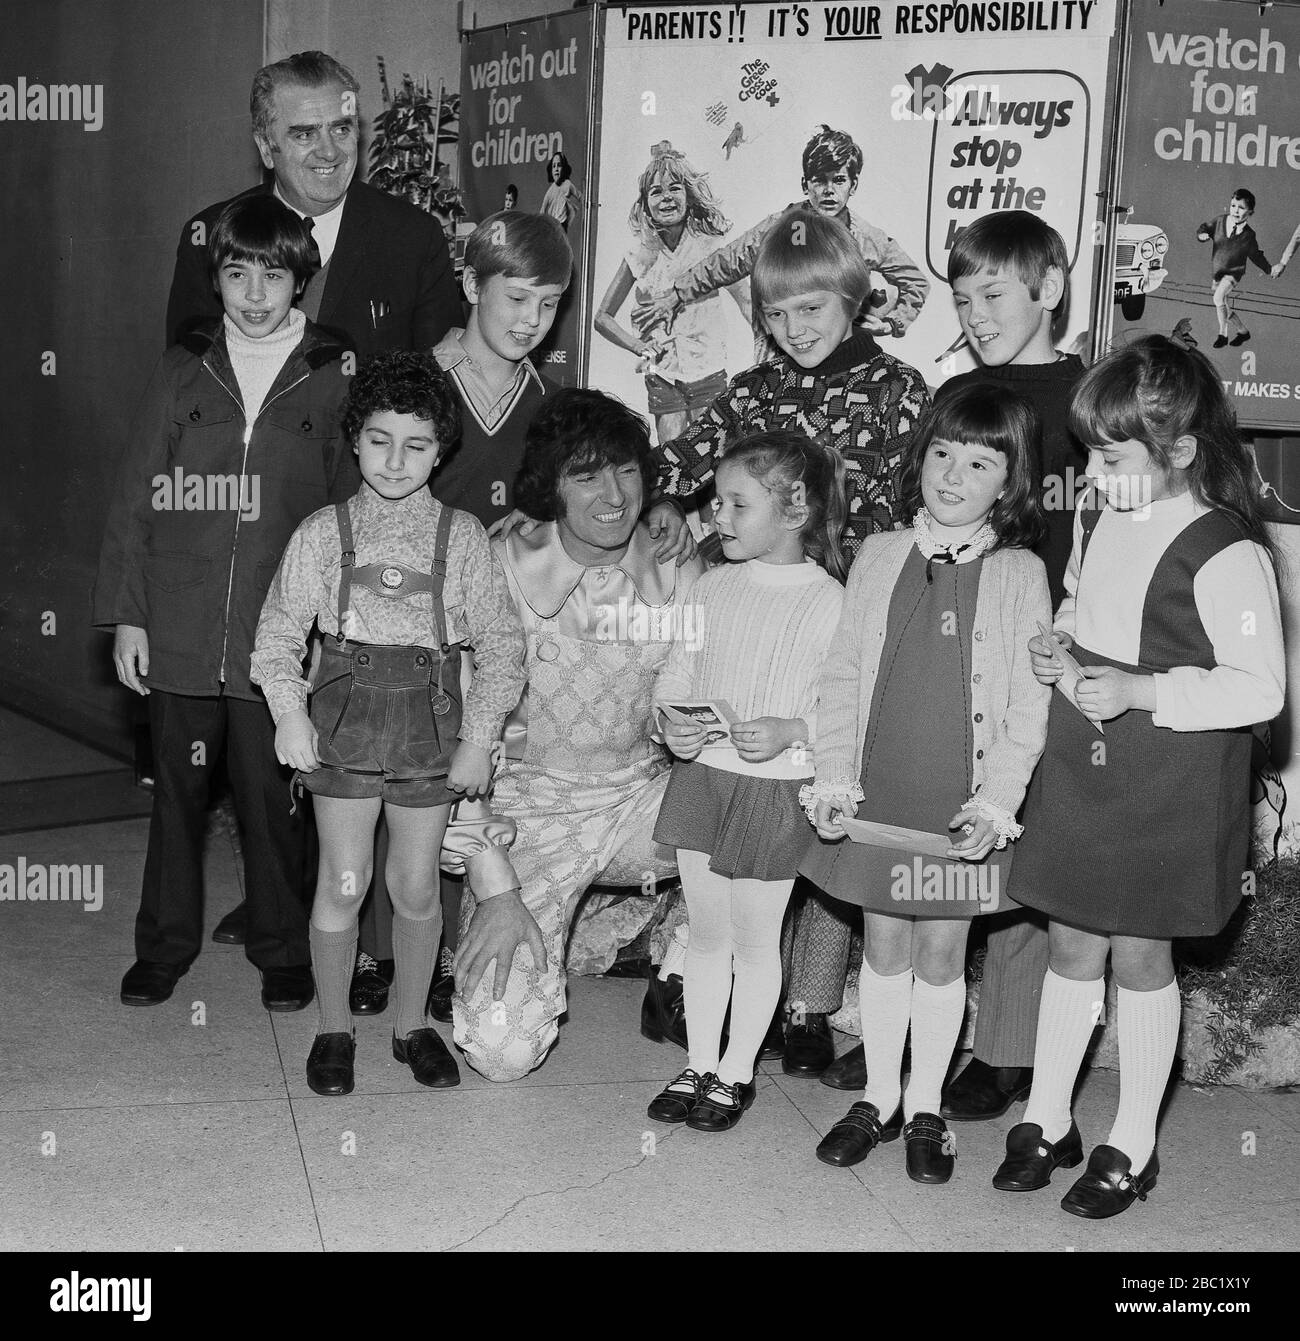 1970s, British comedian and childrens entertainer, Ken Goodwin, with a group of primary schoolgirls and boys infront of promotional posters for children road safety, and the Green Cross Code in the Borough of Lewisham, South East London, England, UK. Stock Photo